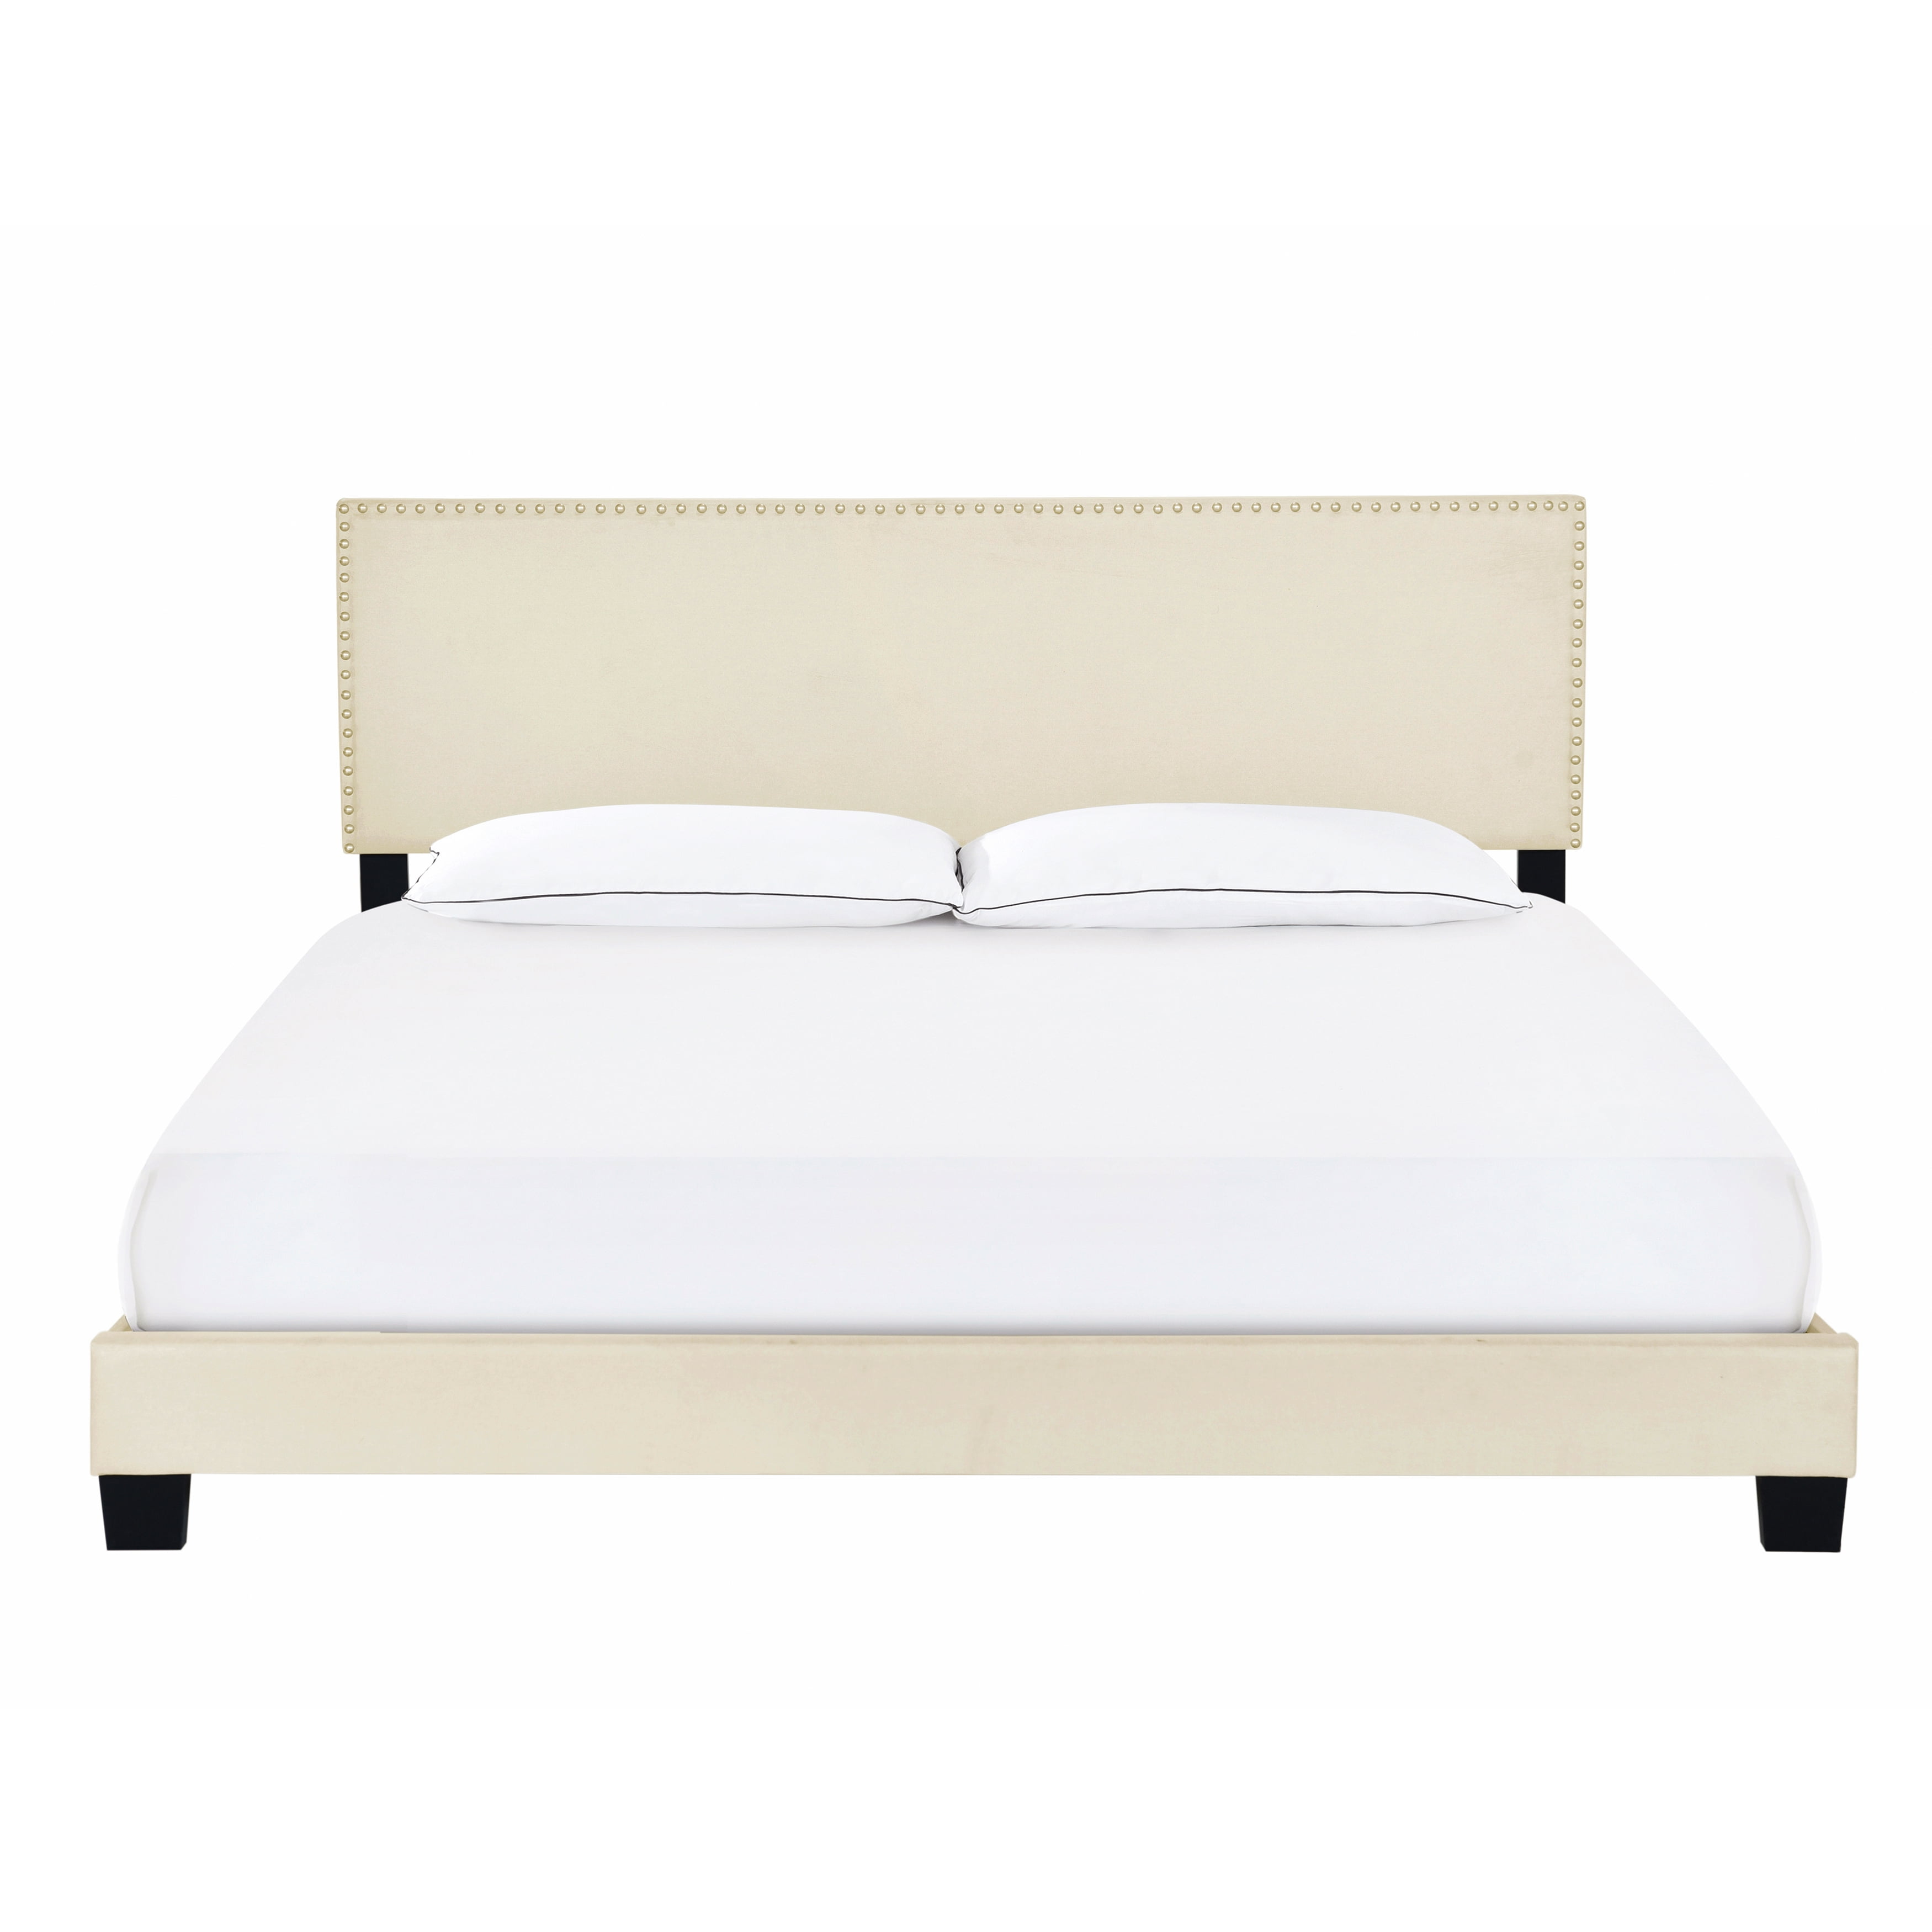 Homefare Upholstered King Size Nail, King Upholstered Bed With Nailhead Trim